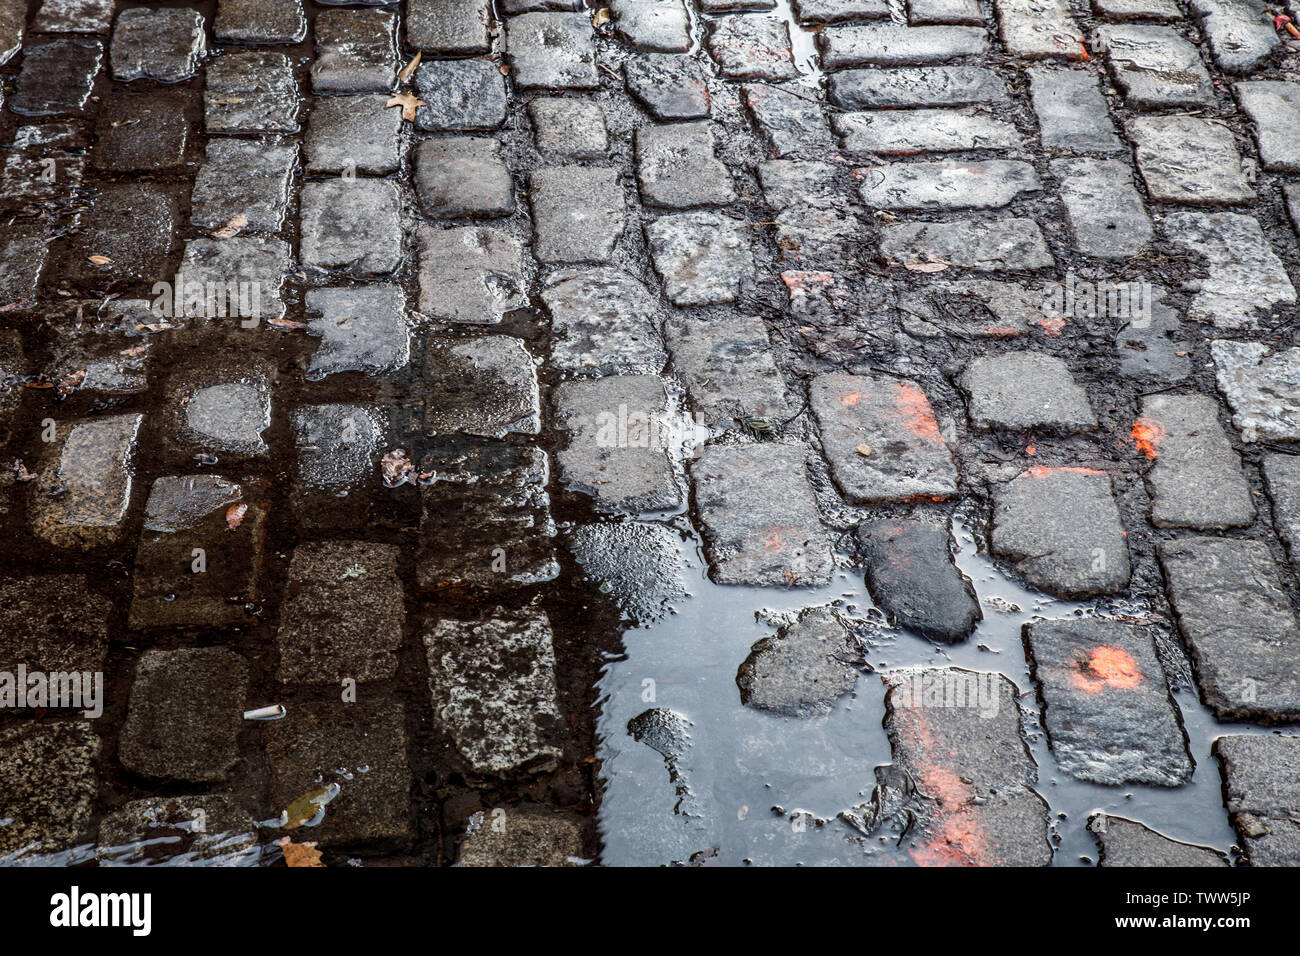 Grungy cobblestone street with puddles, New York City Stock Photo